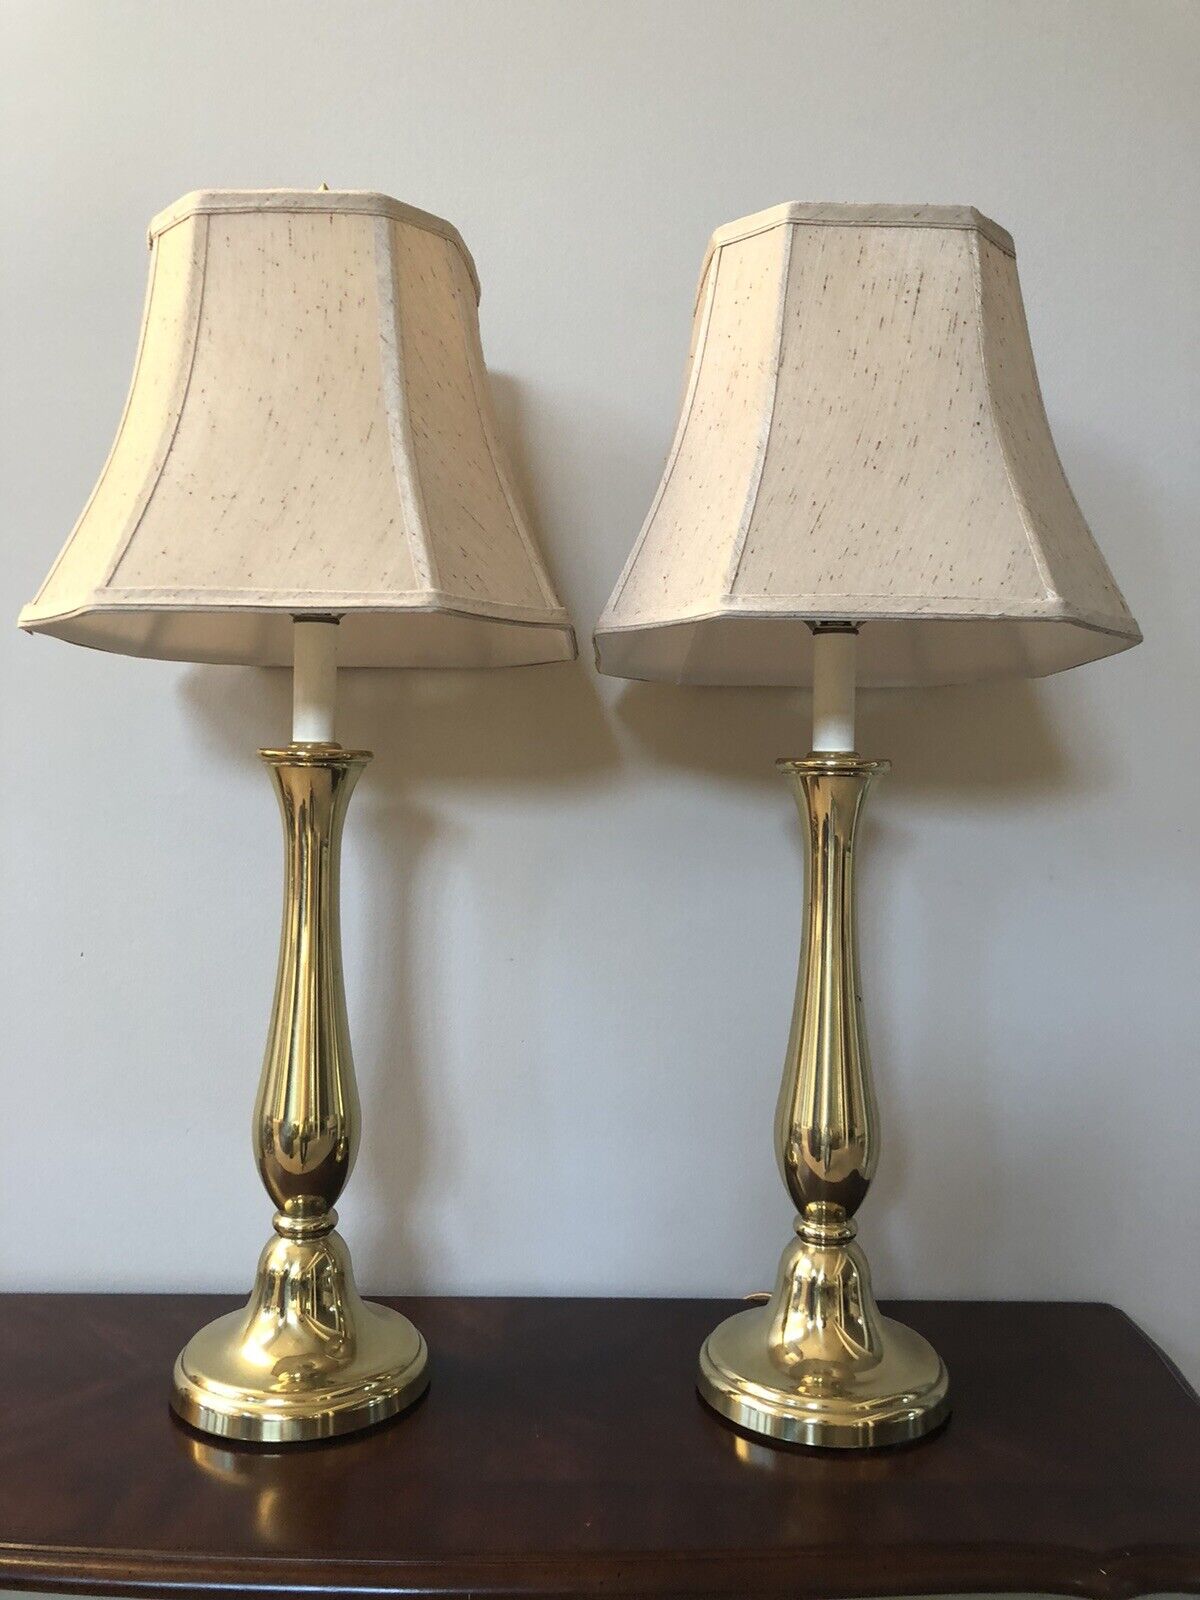 STIFFEL Brass Lamp PAIR Tall Tapered Candlestick Style Table Console with Shades